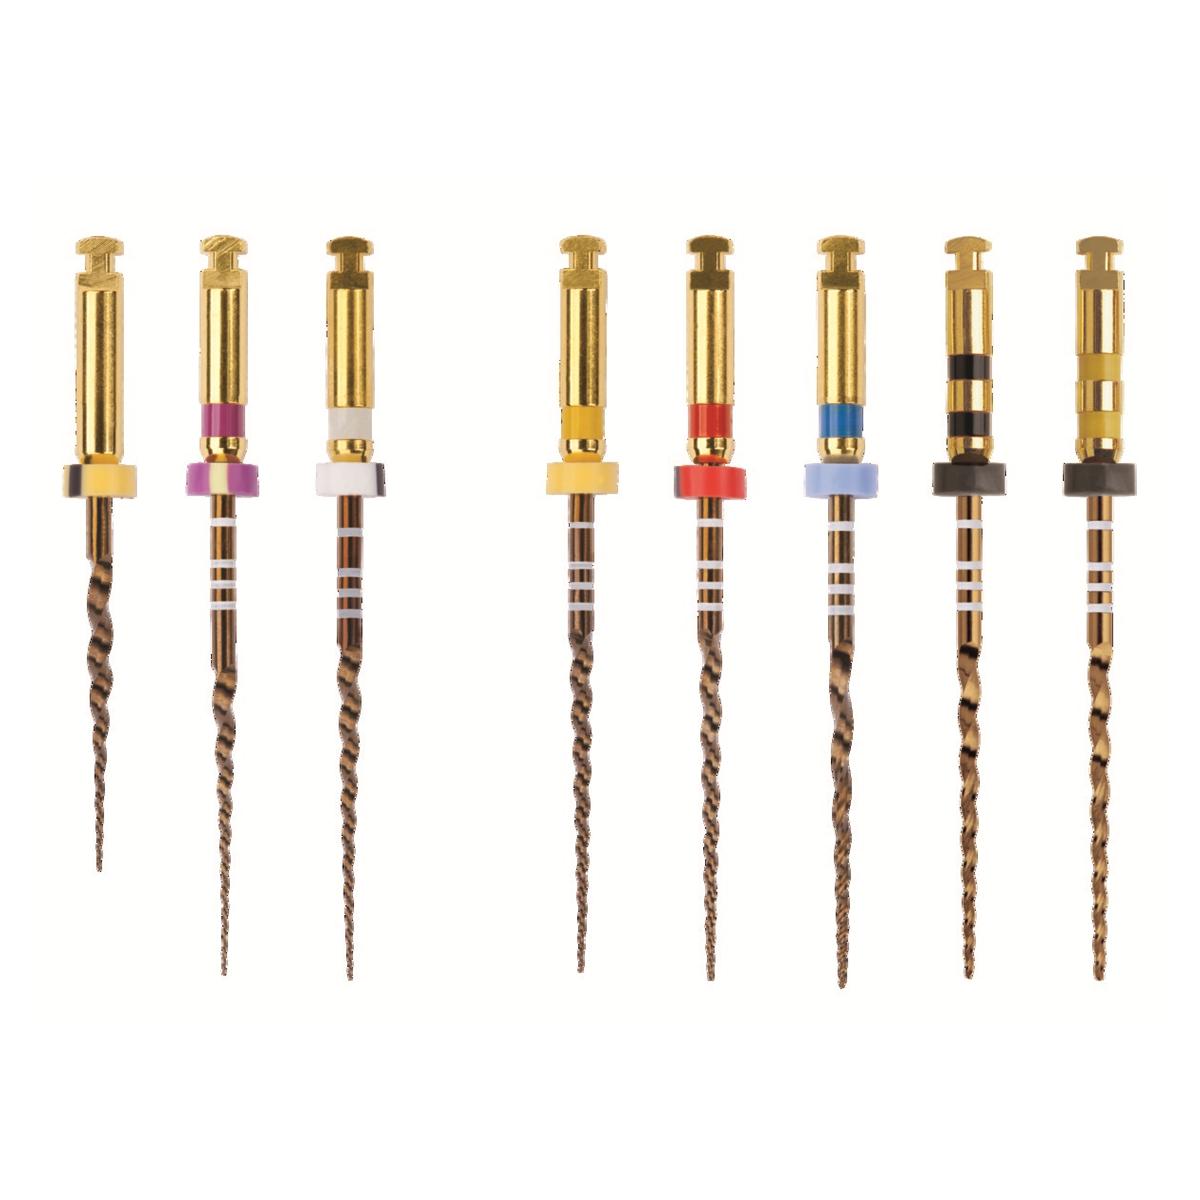 PRO-TAPER GOLD STERILES 25MM S1 (6) MAILLEFER